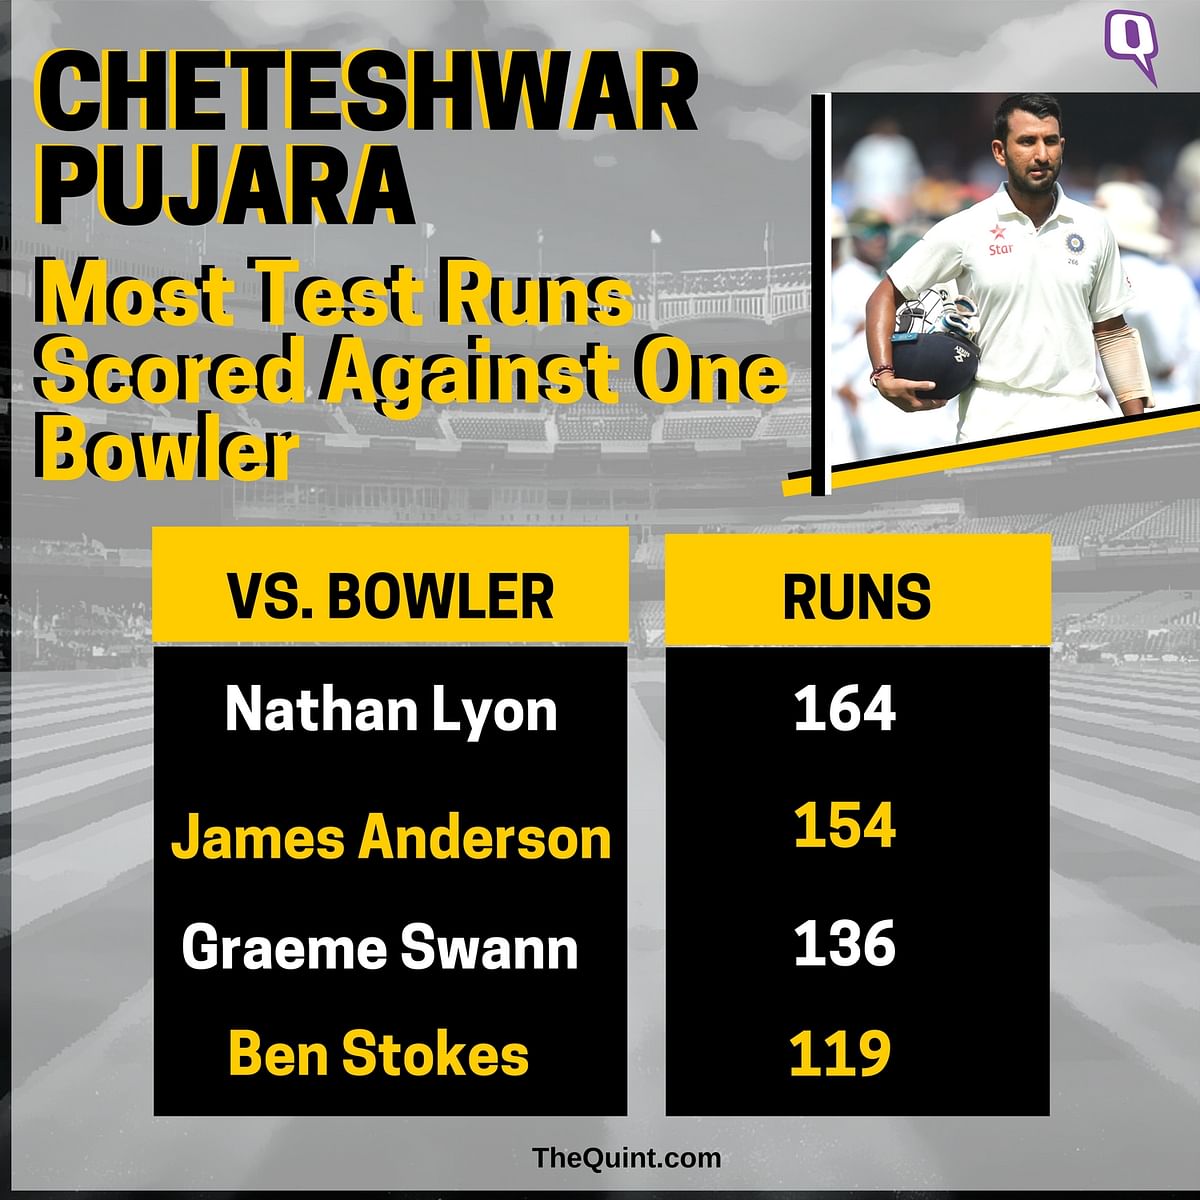 Nathan Lyon may have swept India in the first innings, but Cheteshwar Pujara seems to have his number.